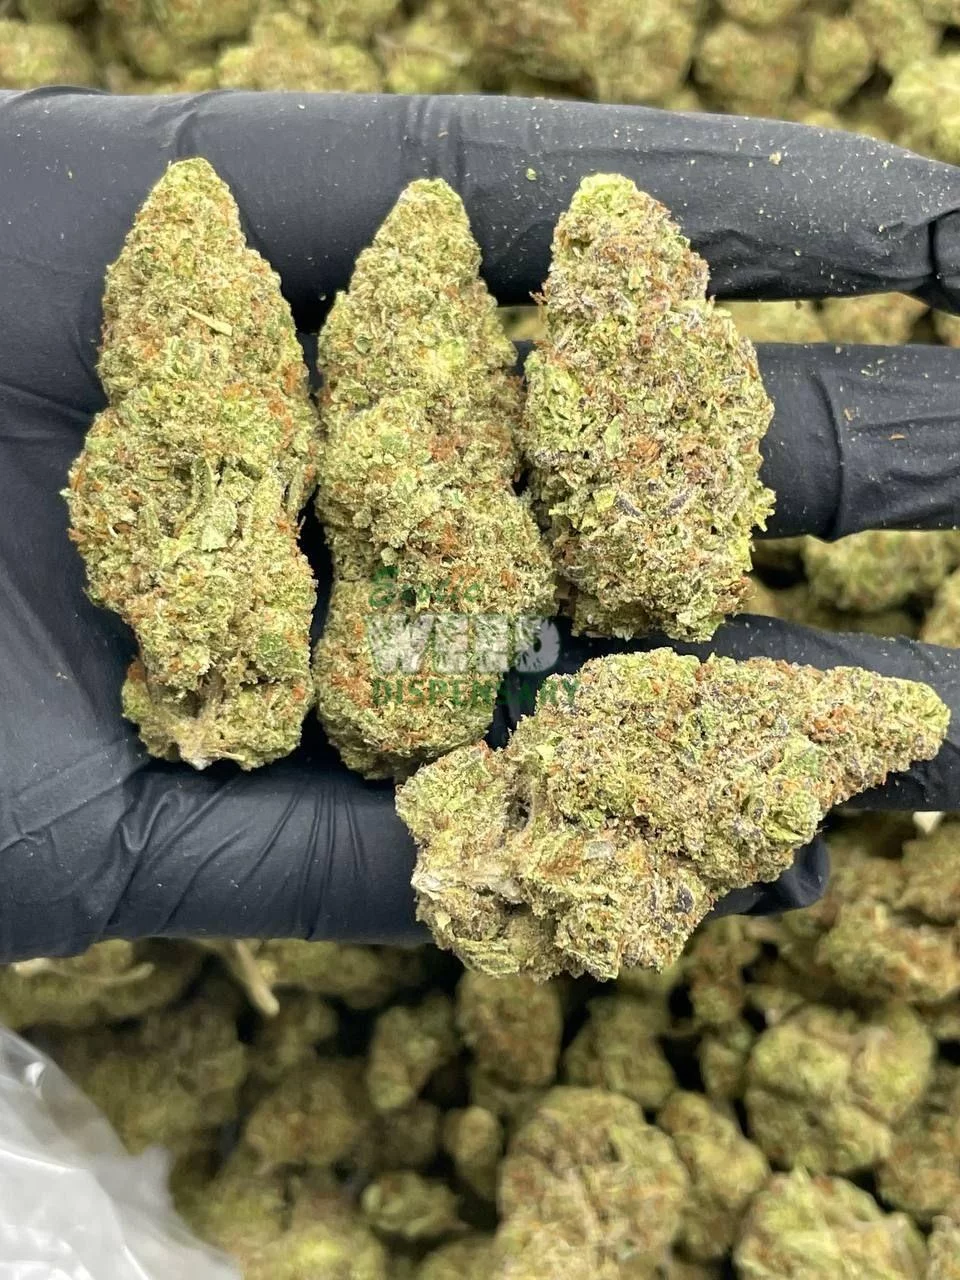 Where To Purchase AK 47 Strain Online In Oregon